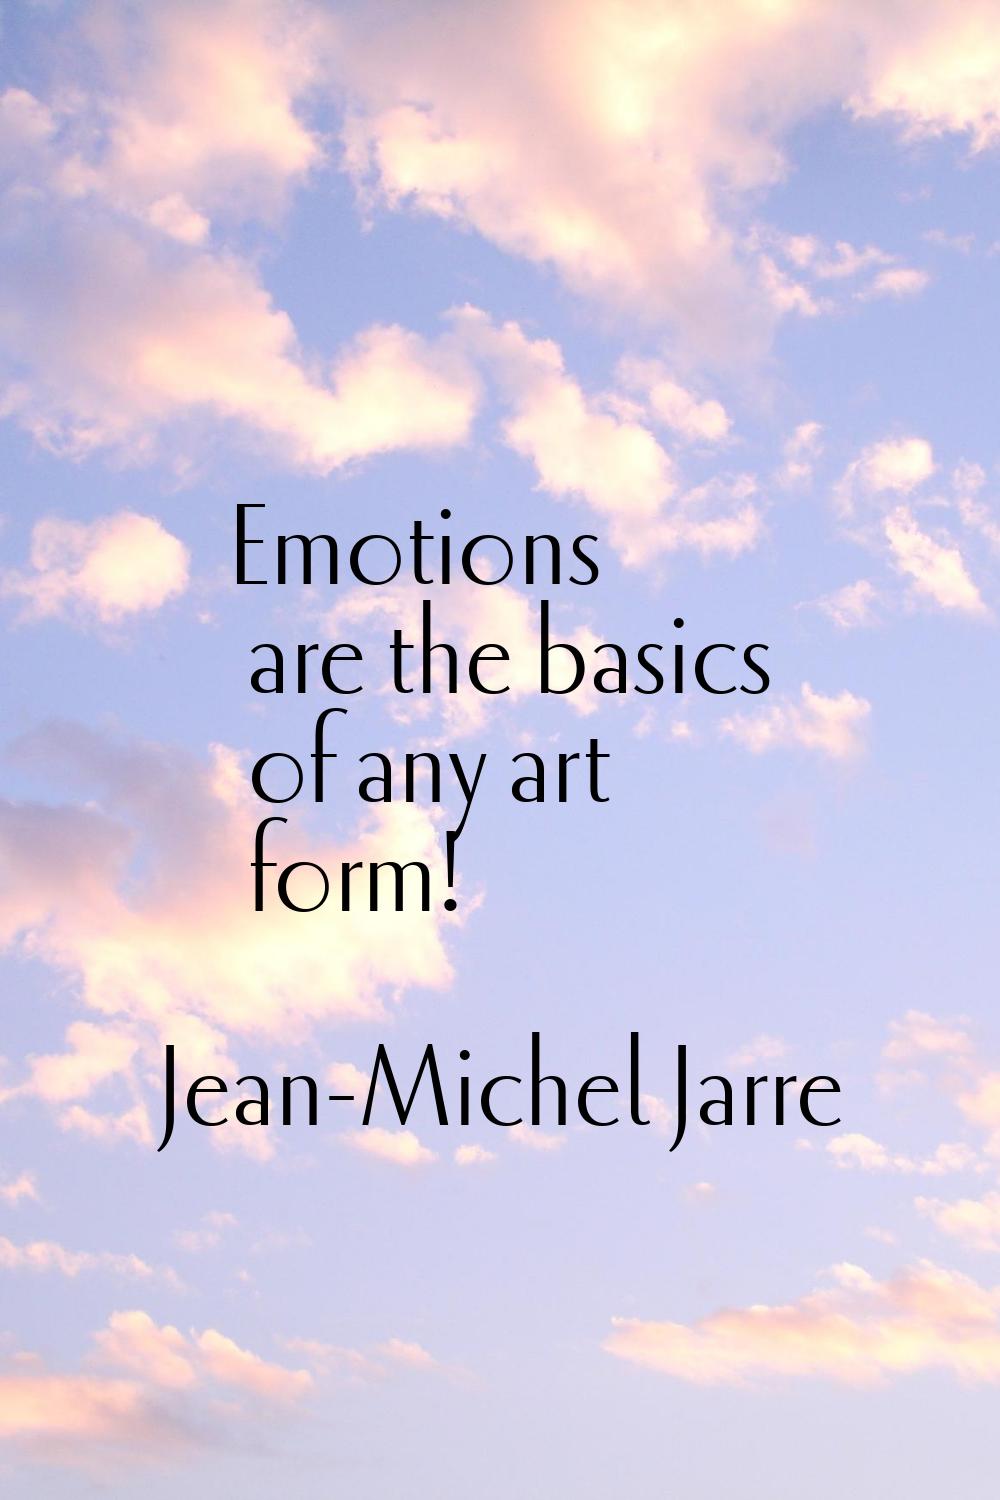 Emotions are the basics of any art form!